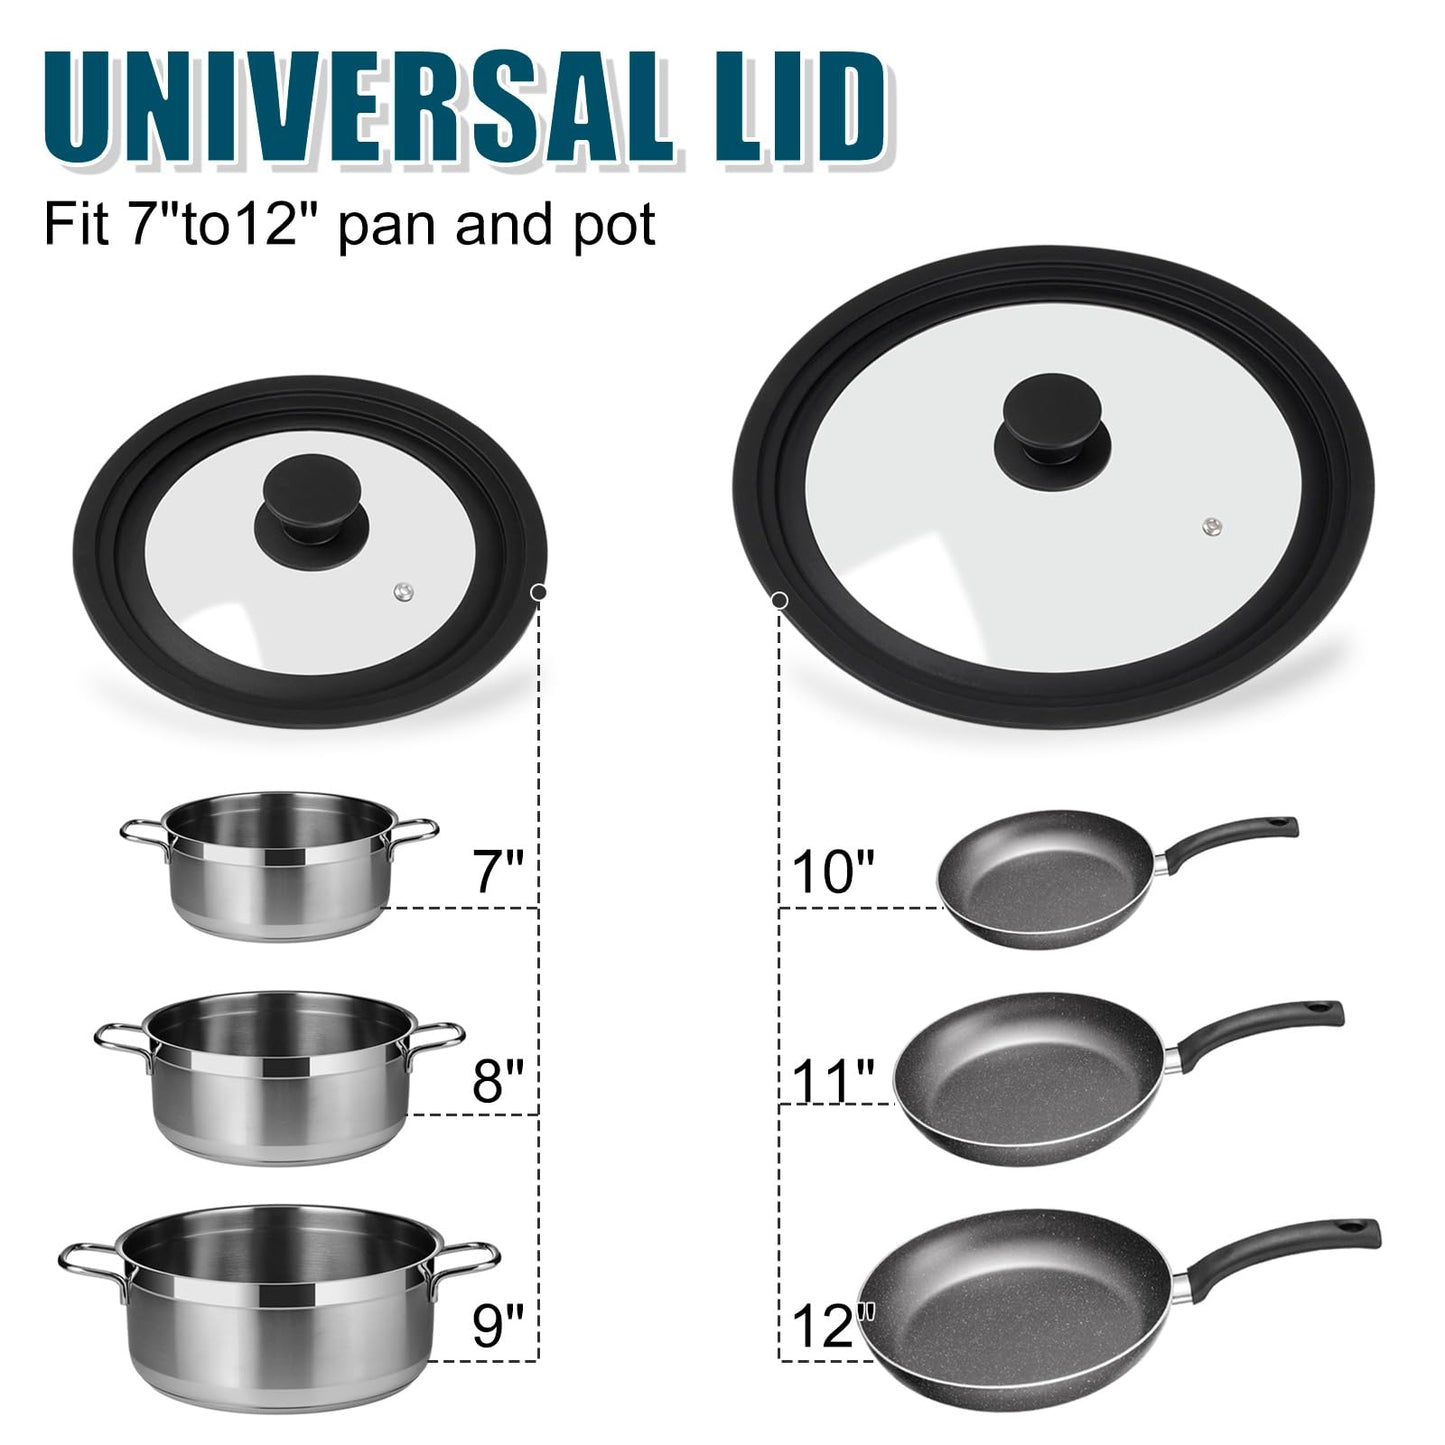 Universal Lid for Pots Pans and Skillets, 2 Pack Pan Cover fit 7", 8" 9" & 10", 11", 12" Diameter Cookware, Silicone Replacement Pan Lid Pot Lids for Frying Pans, Cast Iron,Tempered Glass Lid